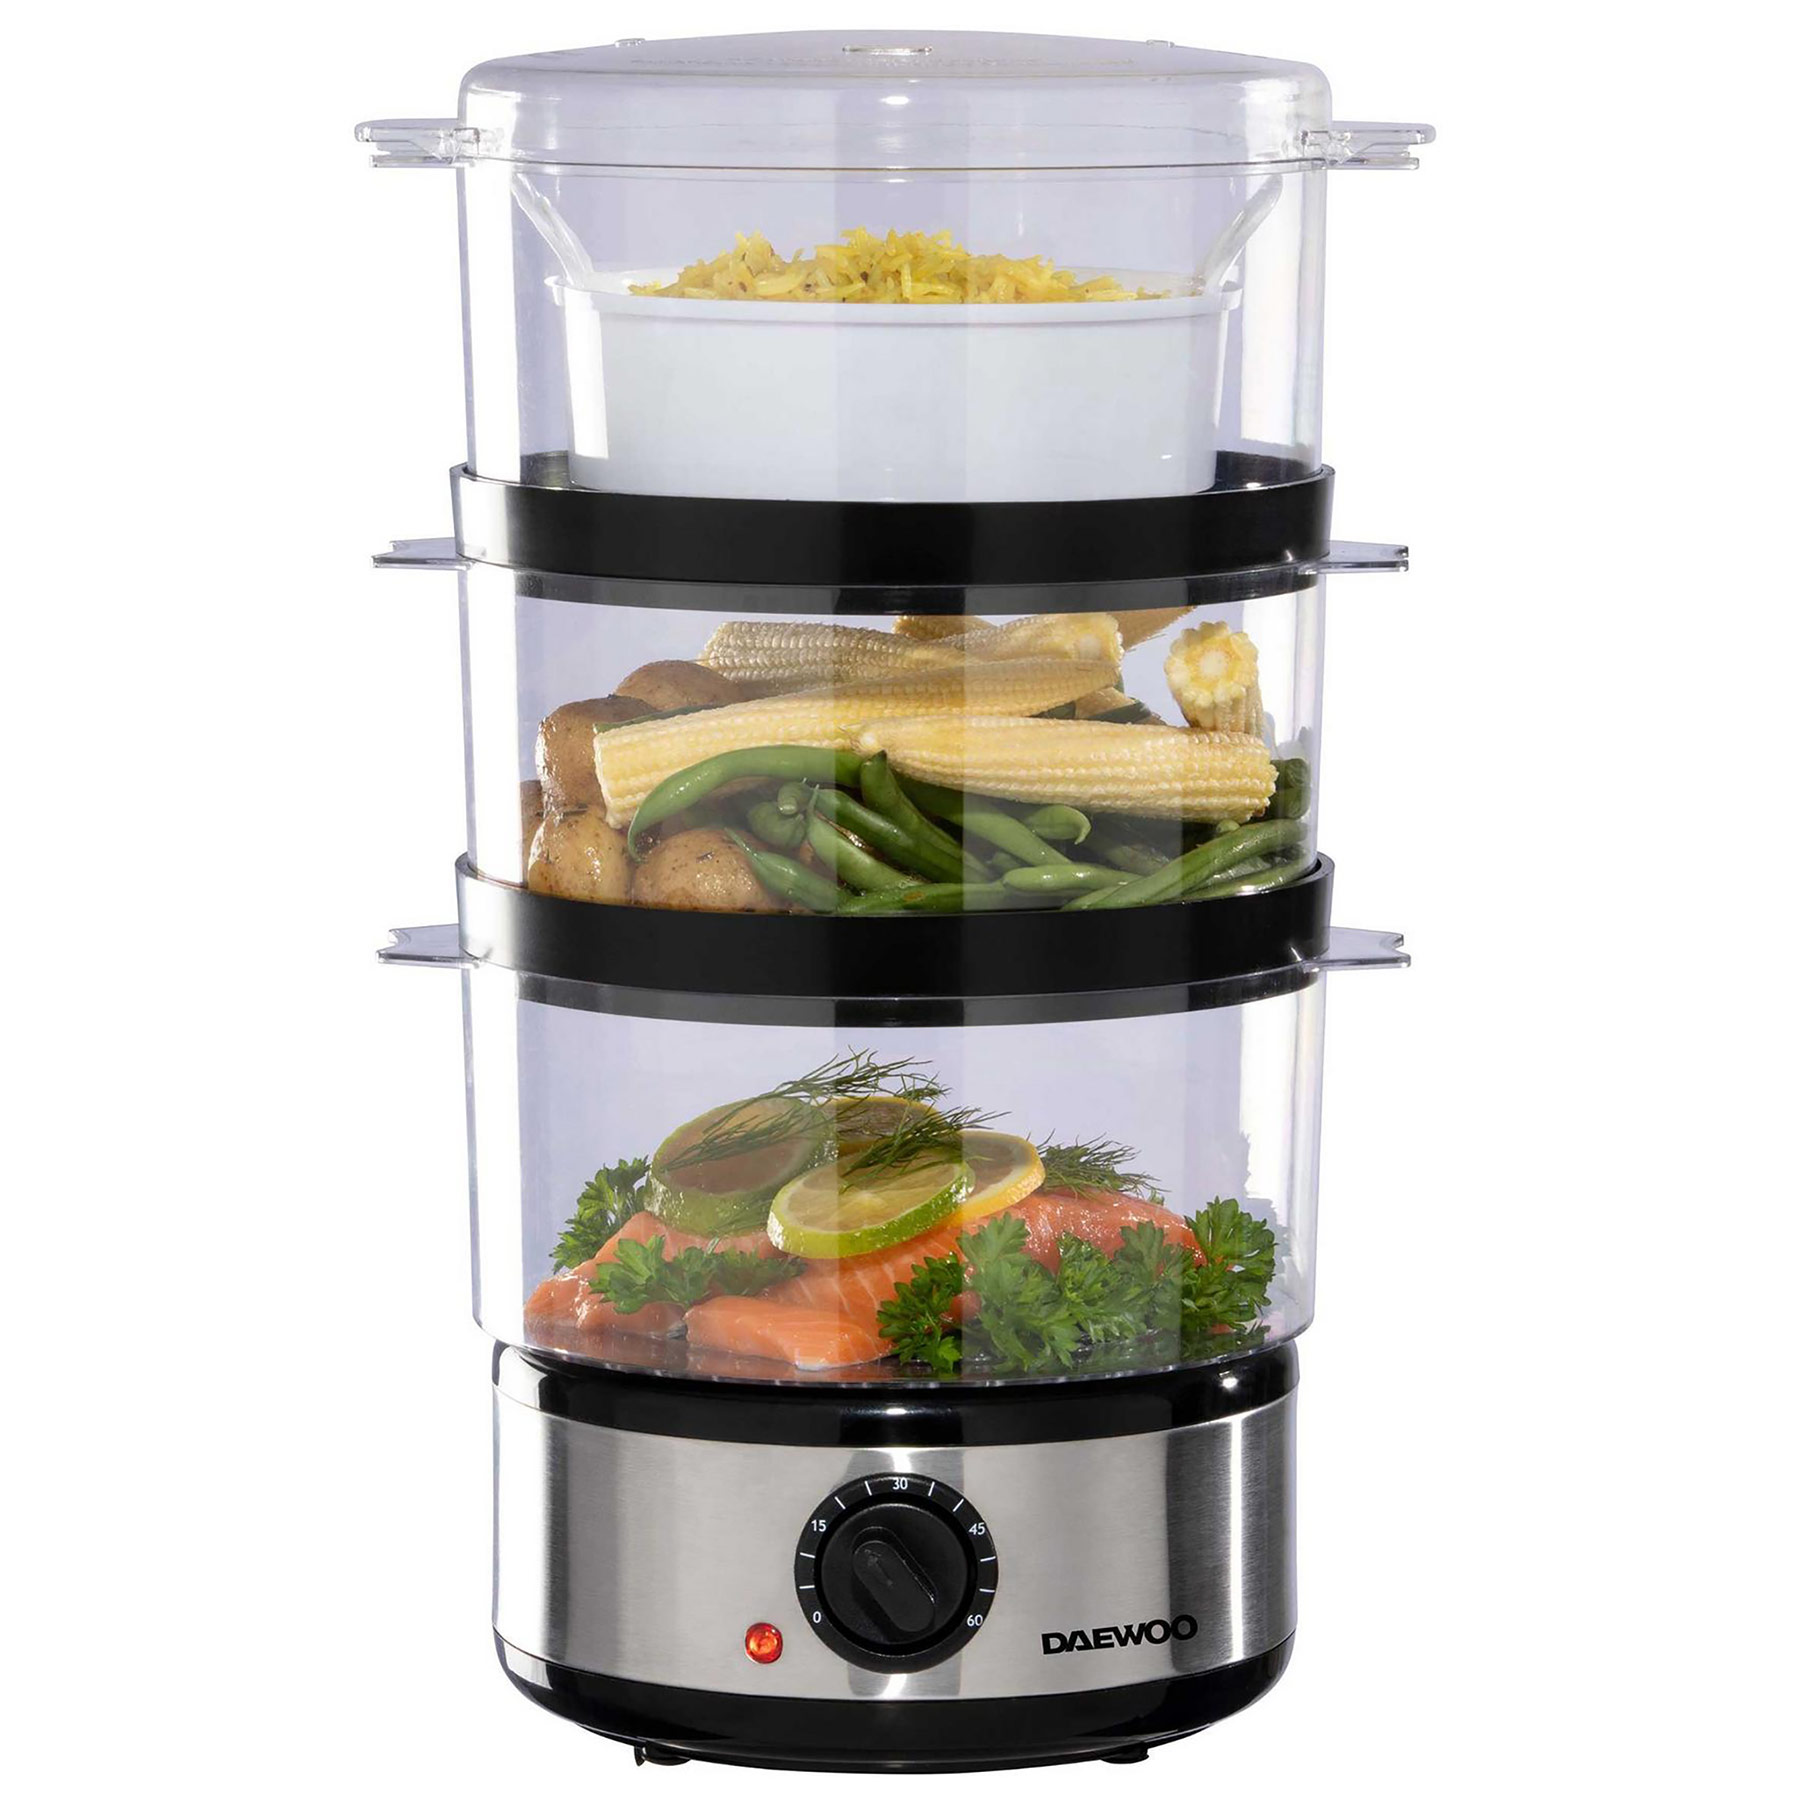 Image of Daewoo SDA2325GE 3 Tier Compact Electric Food Steamer with Rice Bowl